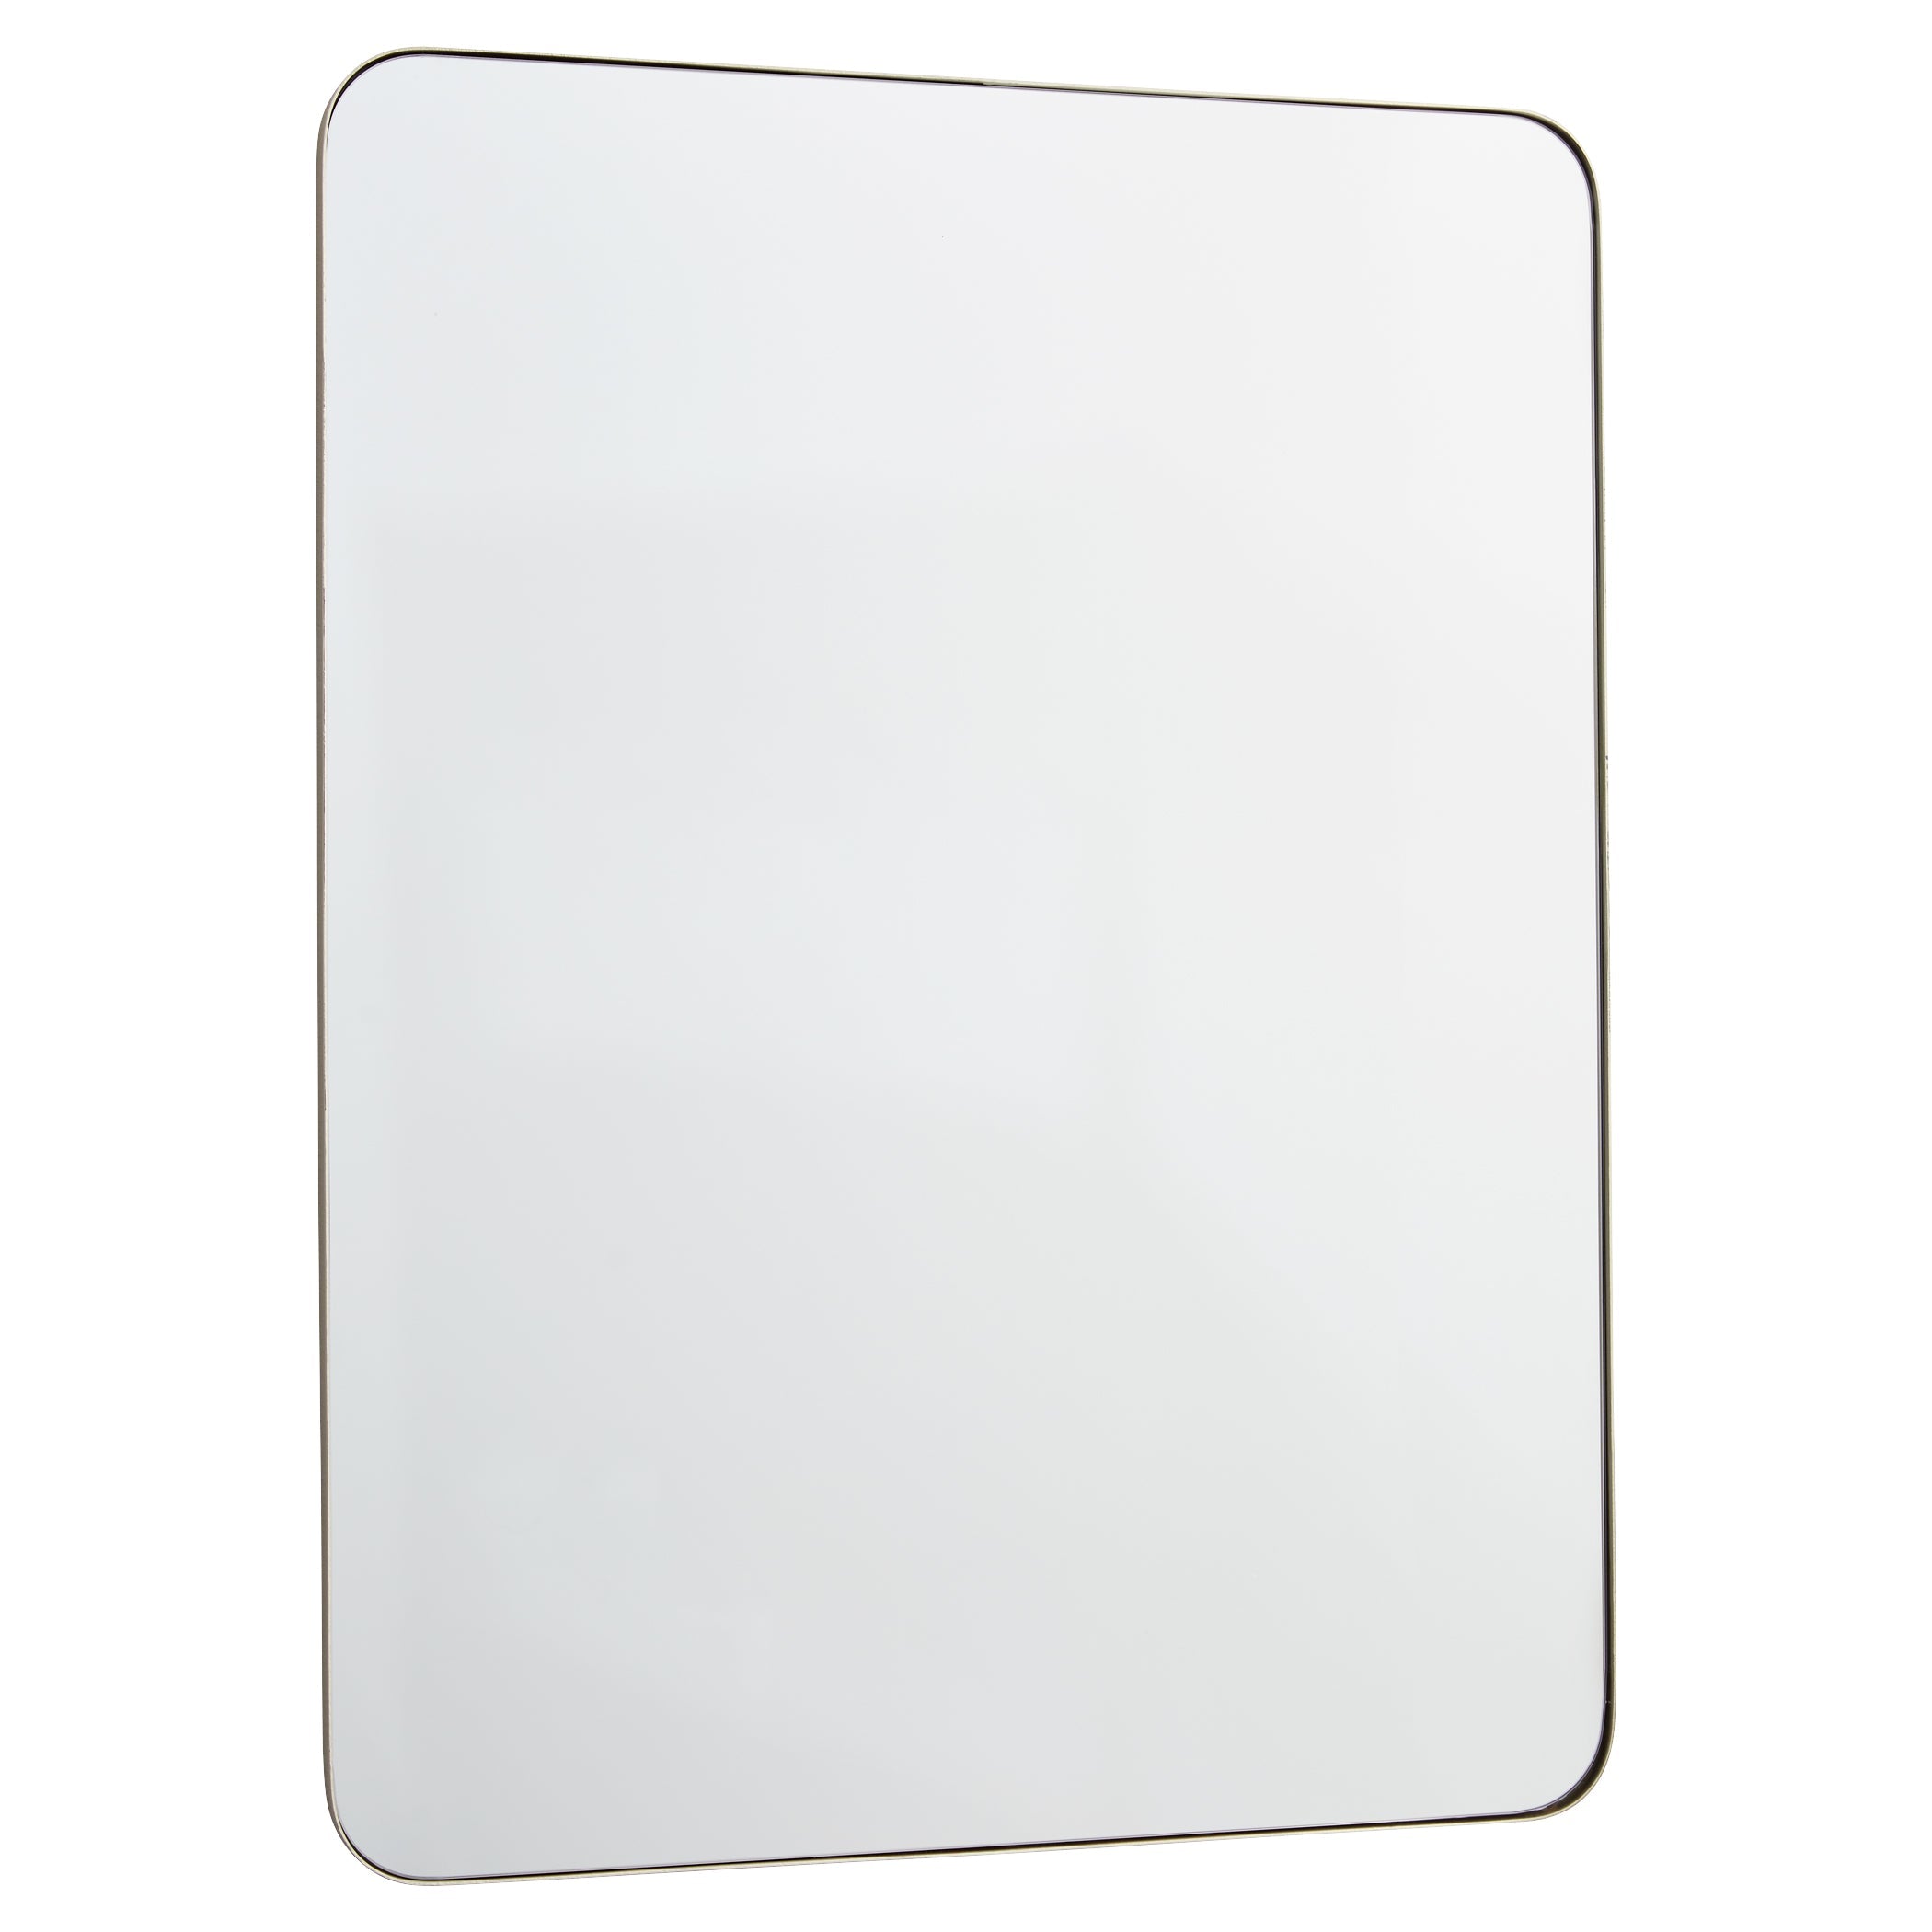 Quorum 12-3040-61 Mirror - Silver Finished